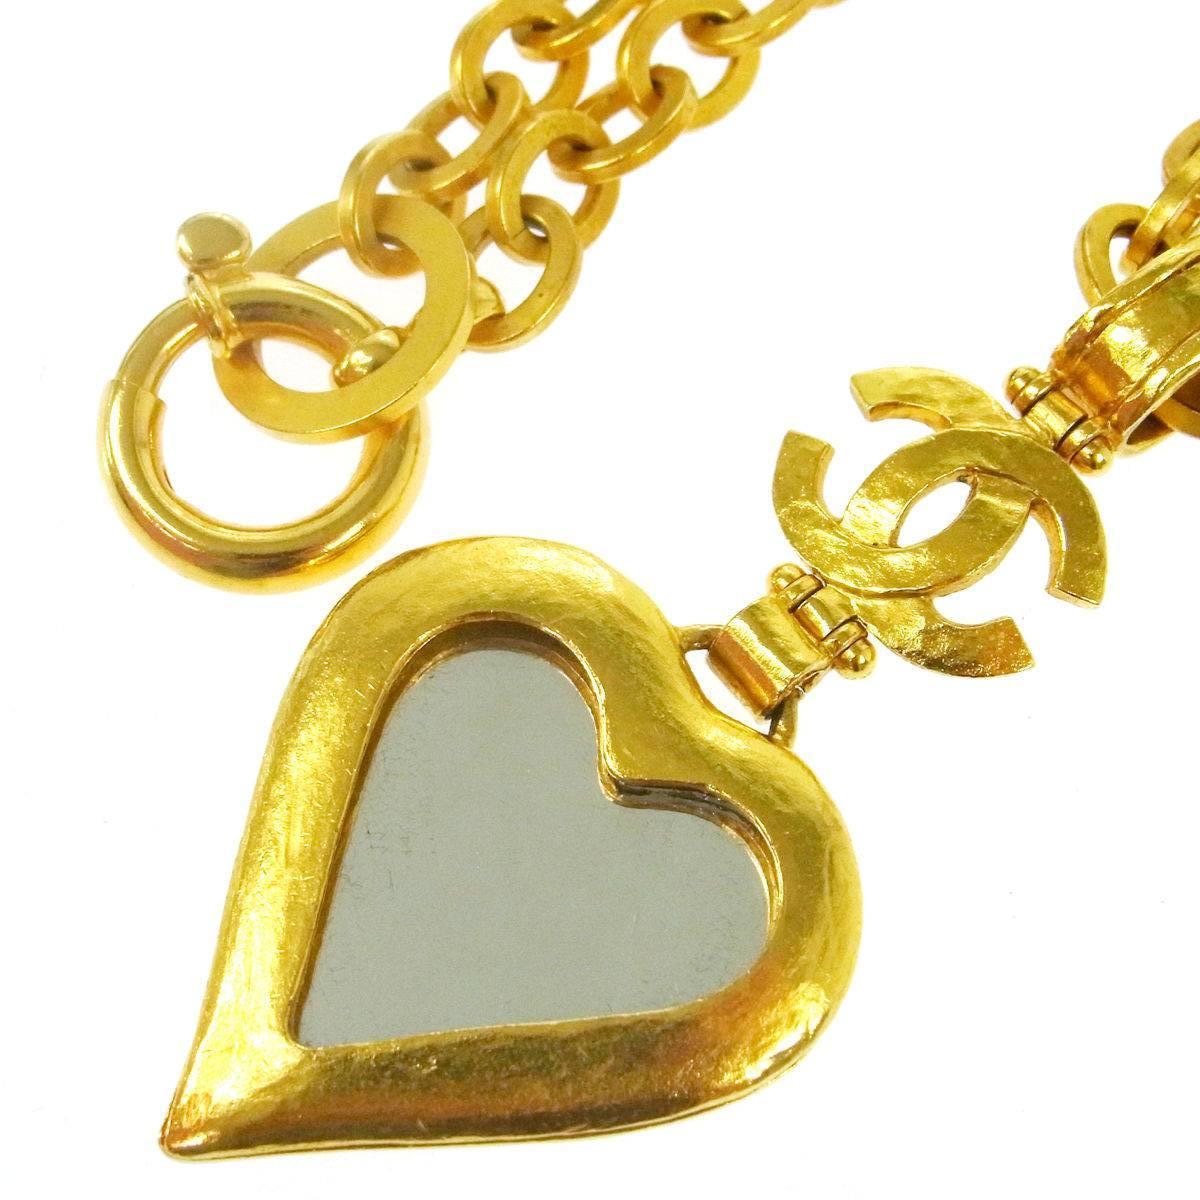 chanel gold heart necklace